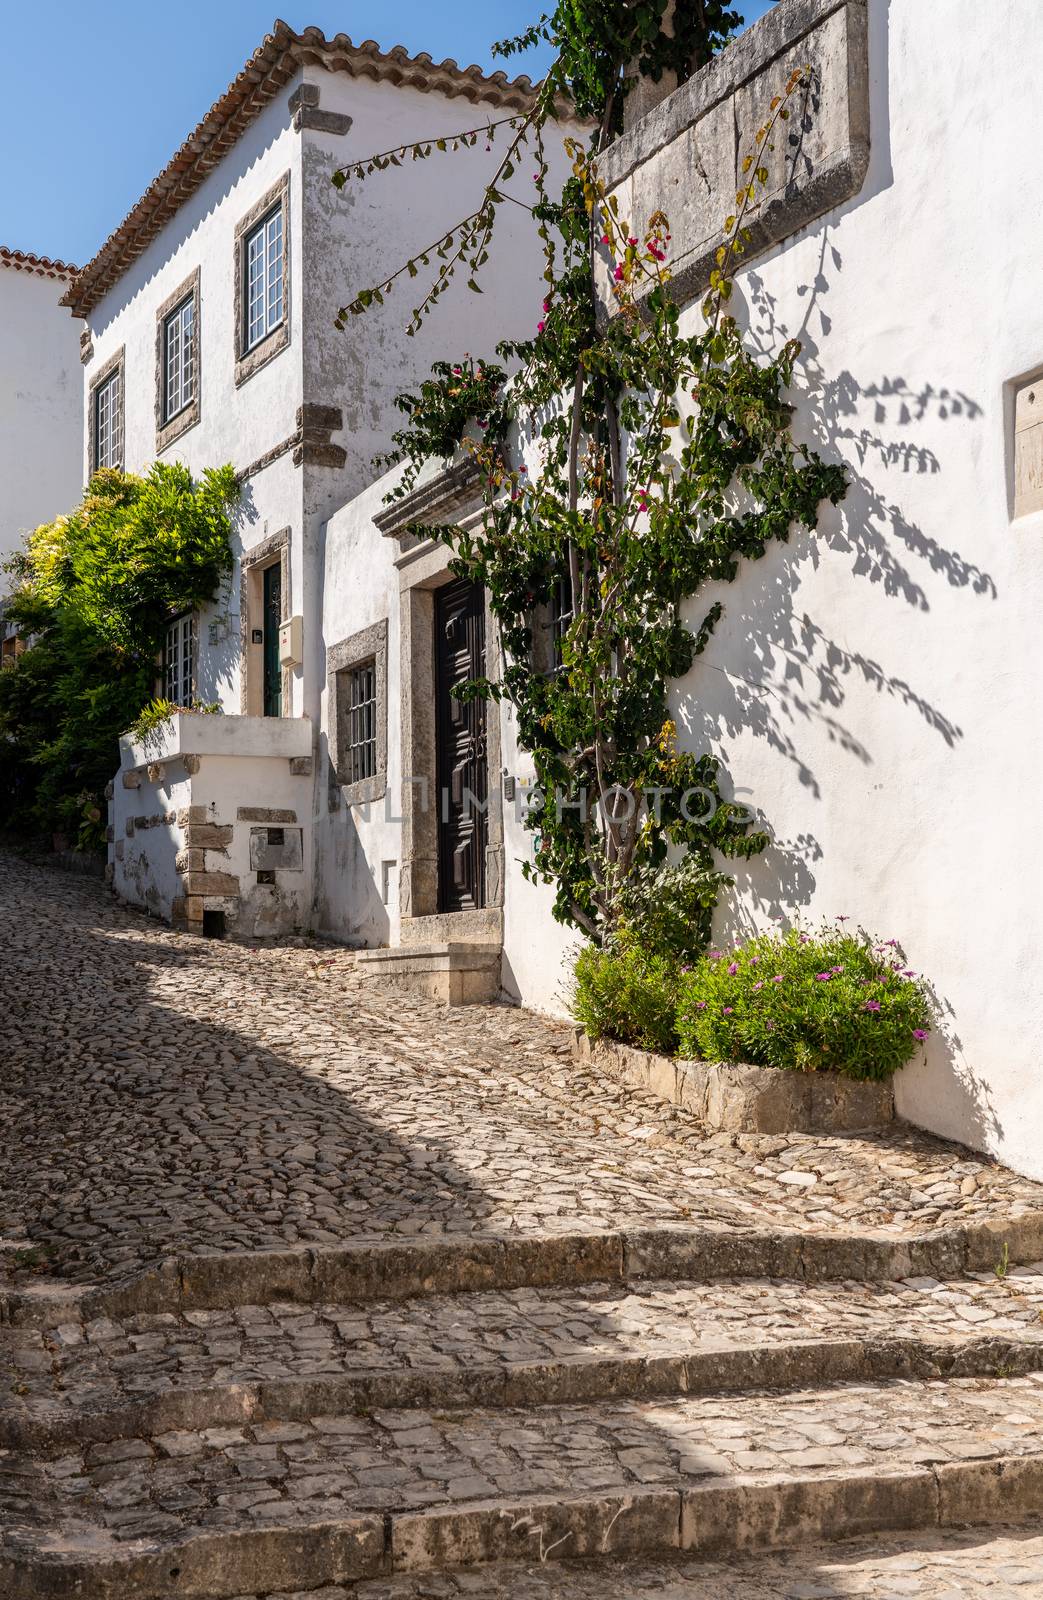 Steep street with homes in the old medieval walled city of Obidos in Portugal